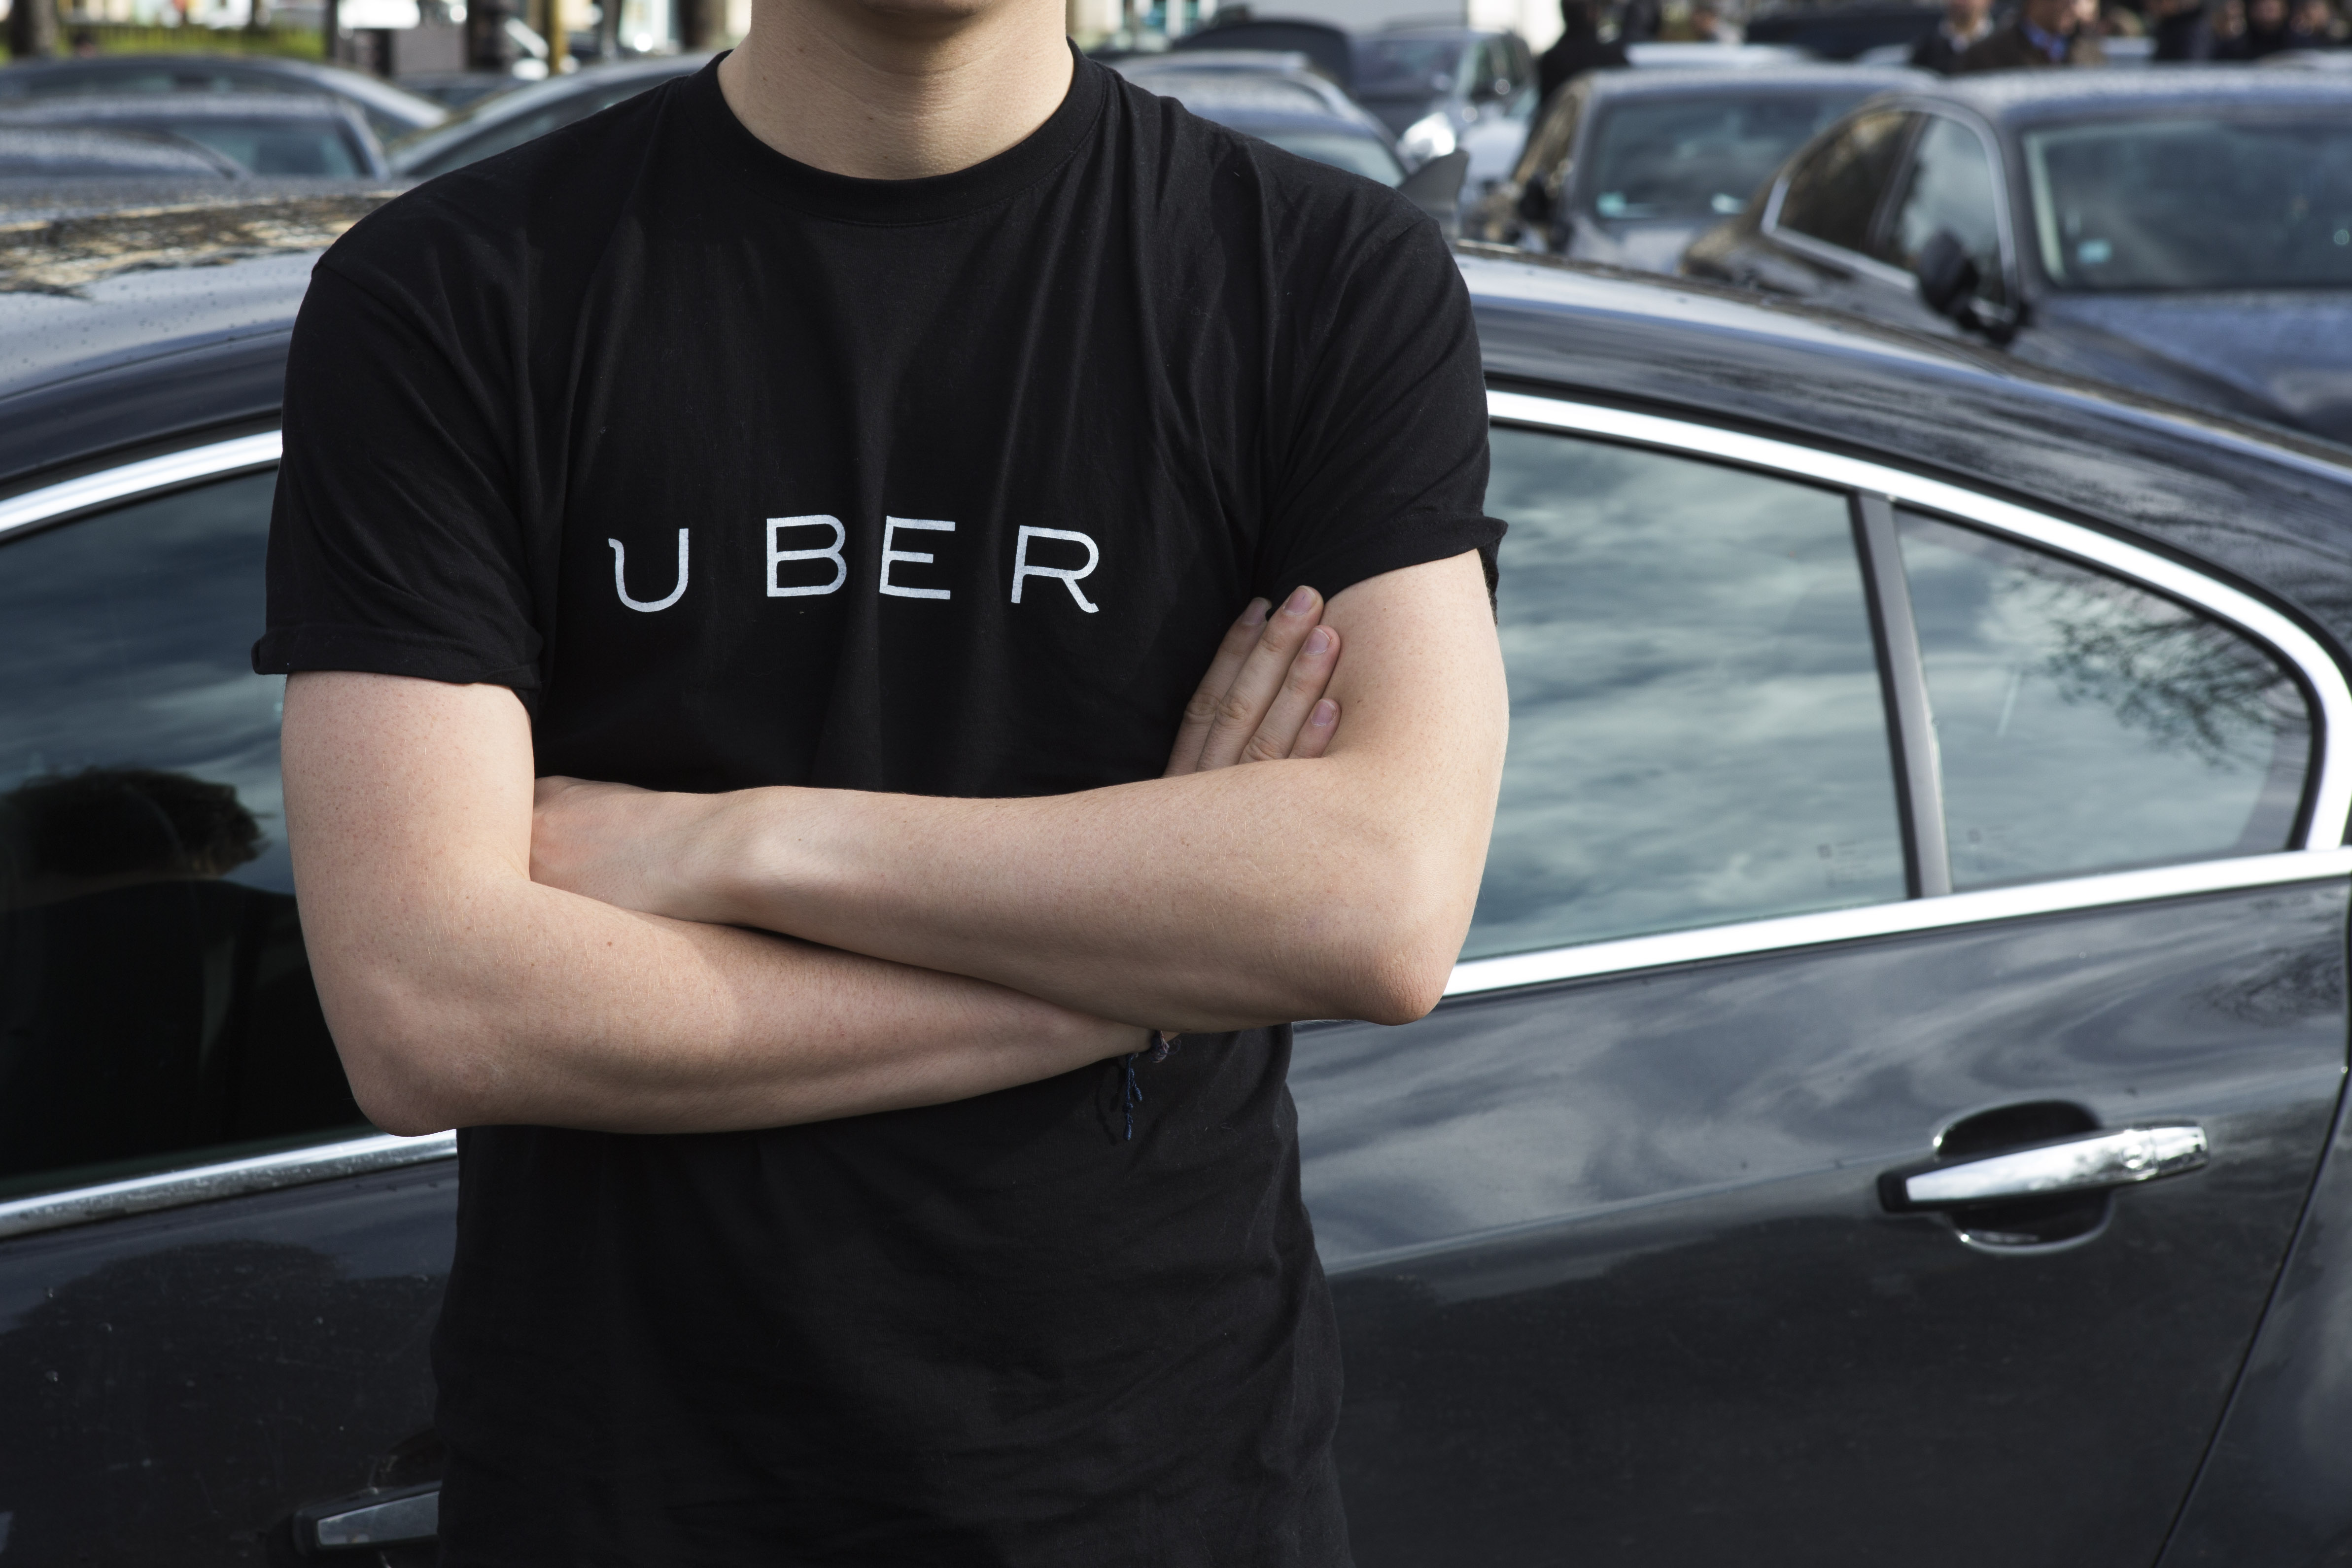 Uber driver in an Uber shirt in front of a black car